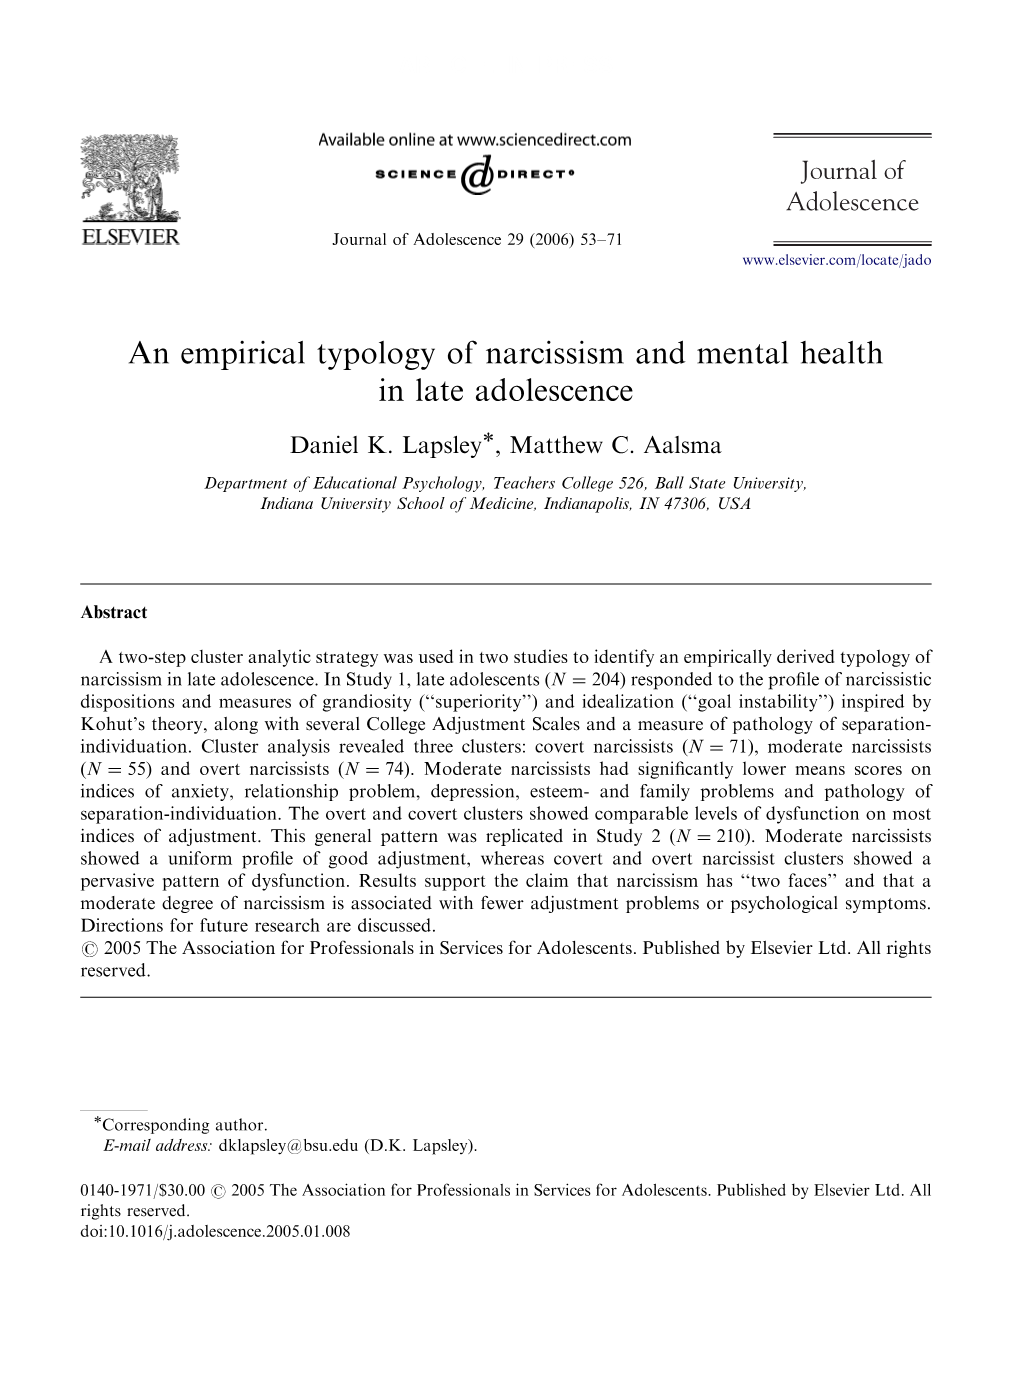 An Empirical Typology of Narcissism and Mental Health in Late Adolescence